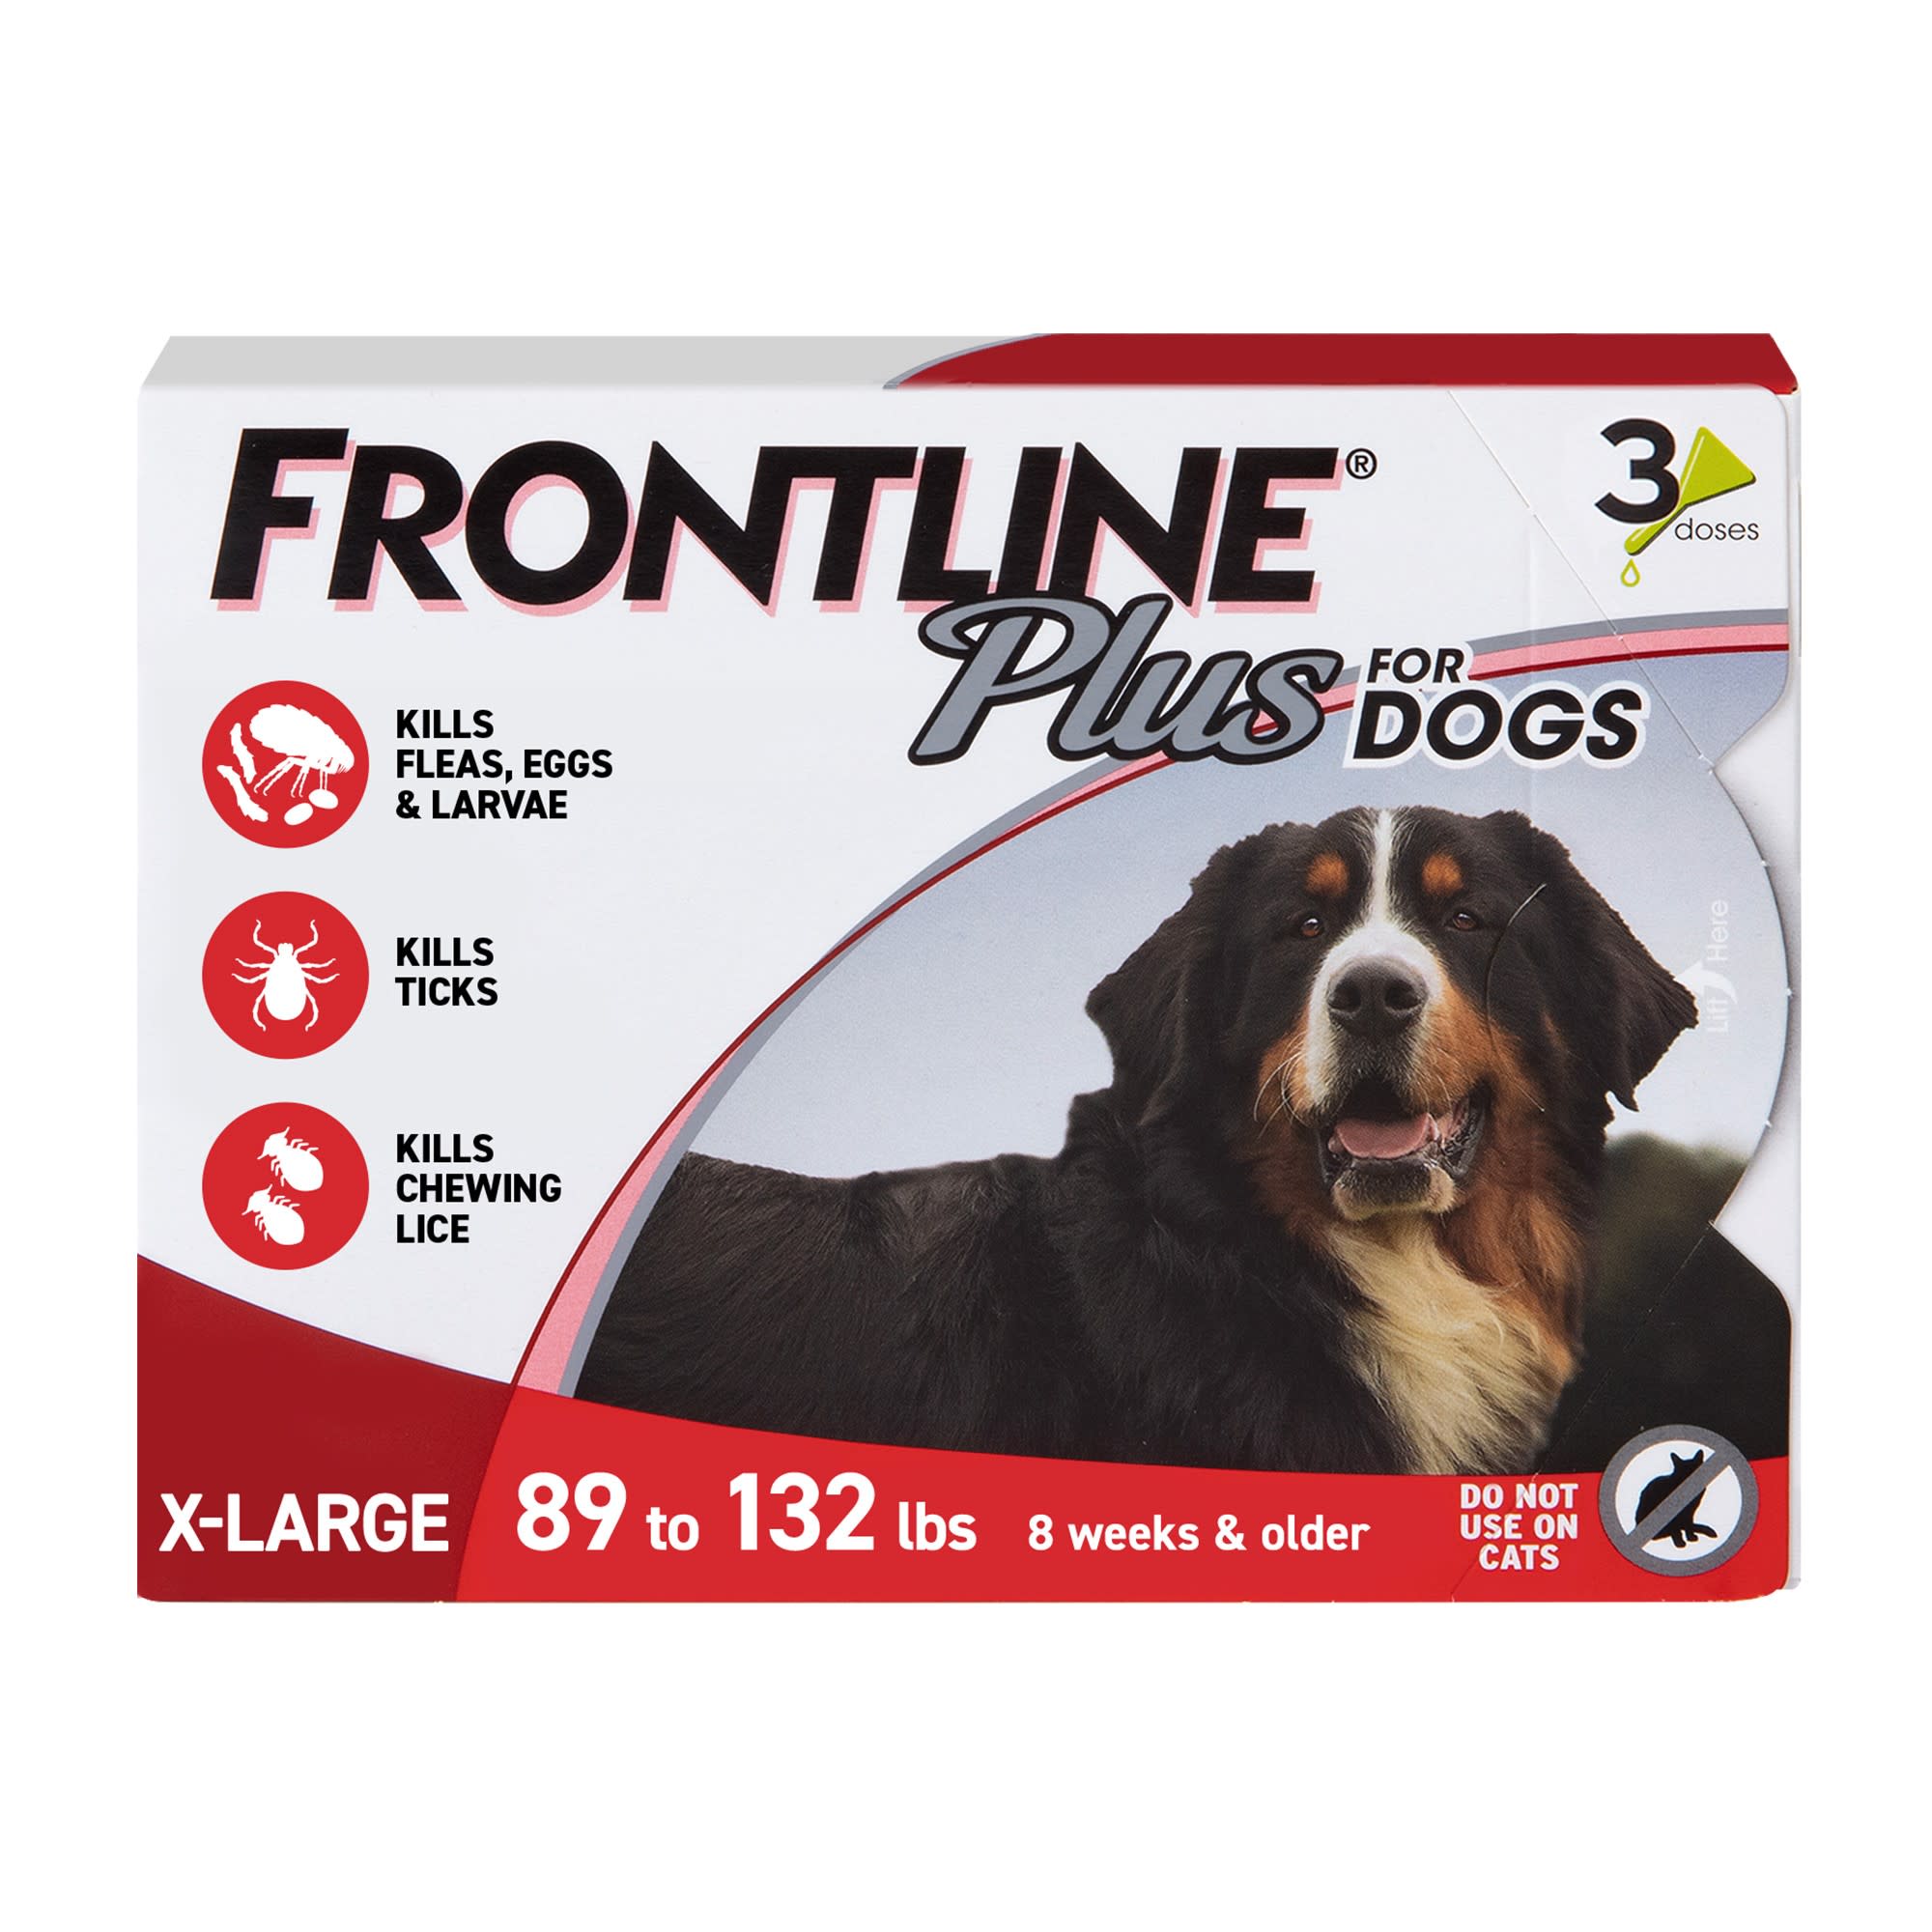 Photos - Dog Medicines & Vitamins Frontline Plus Flea and Tick Treatment for X-Large Dogs Up to 89 